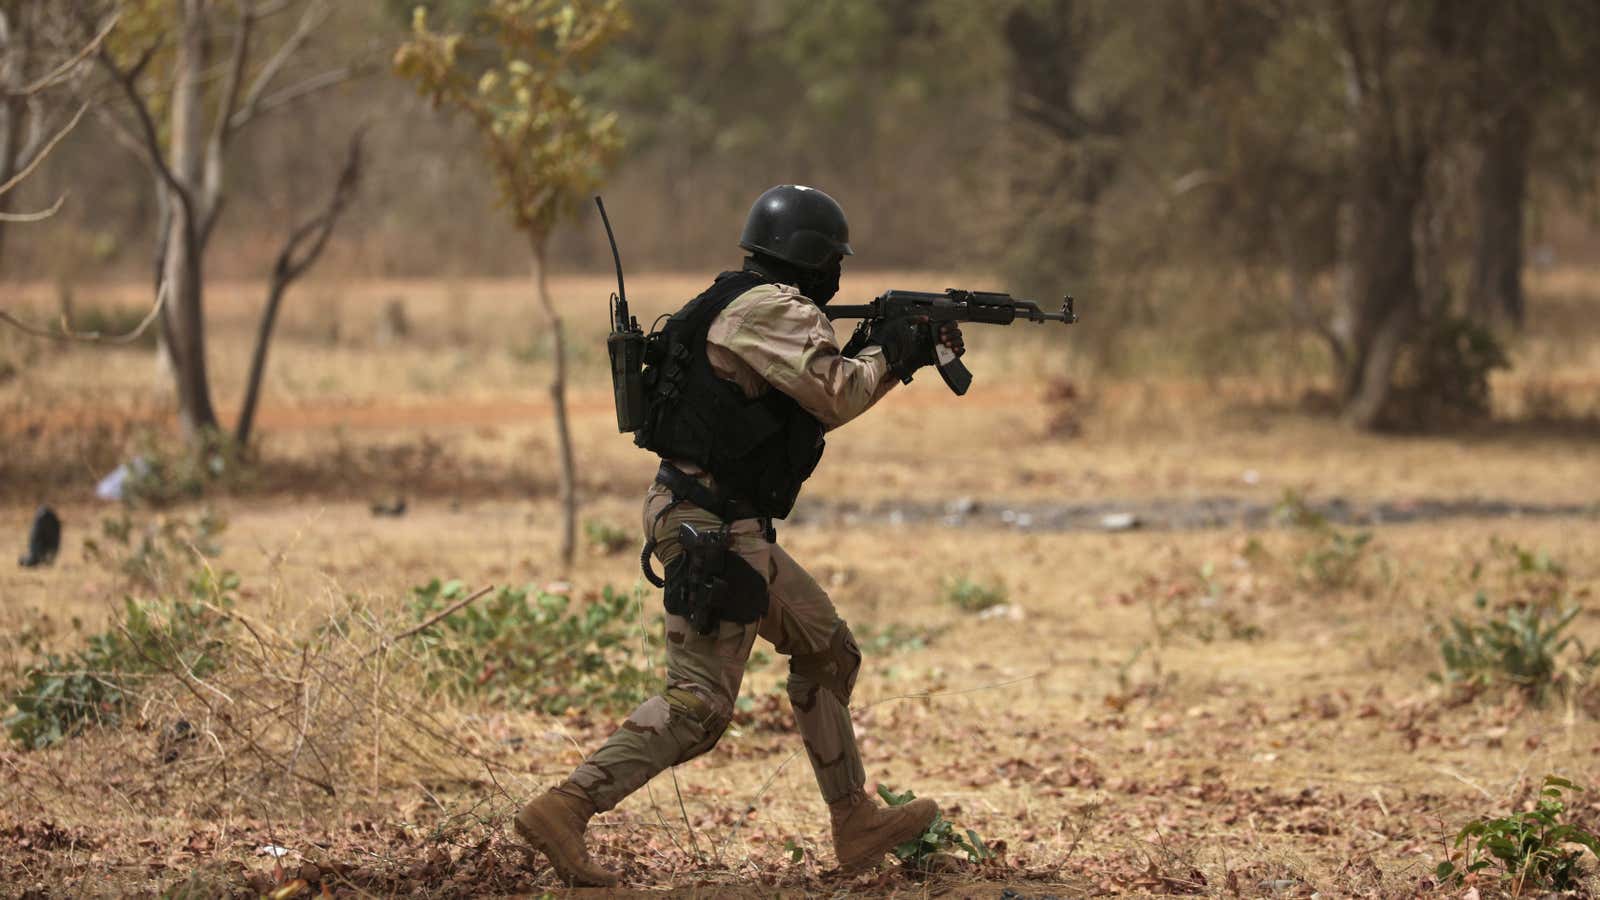 A soldier from Burkina Faso in a simulated raid during US sponsored exercises in Ouagadougou, Burkina Faso in 2019